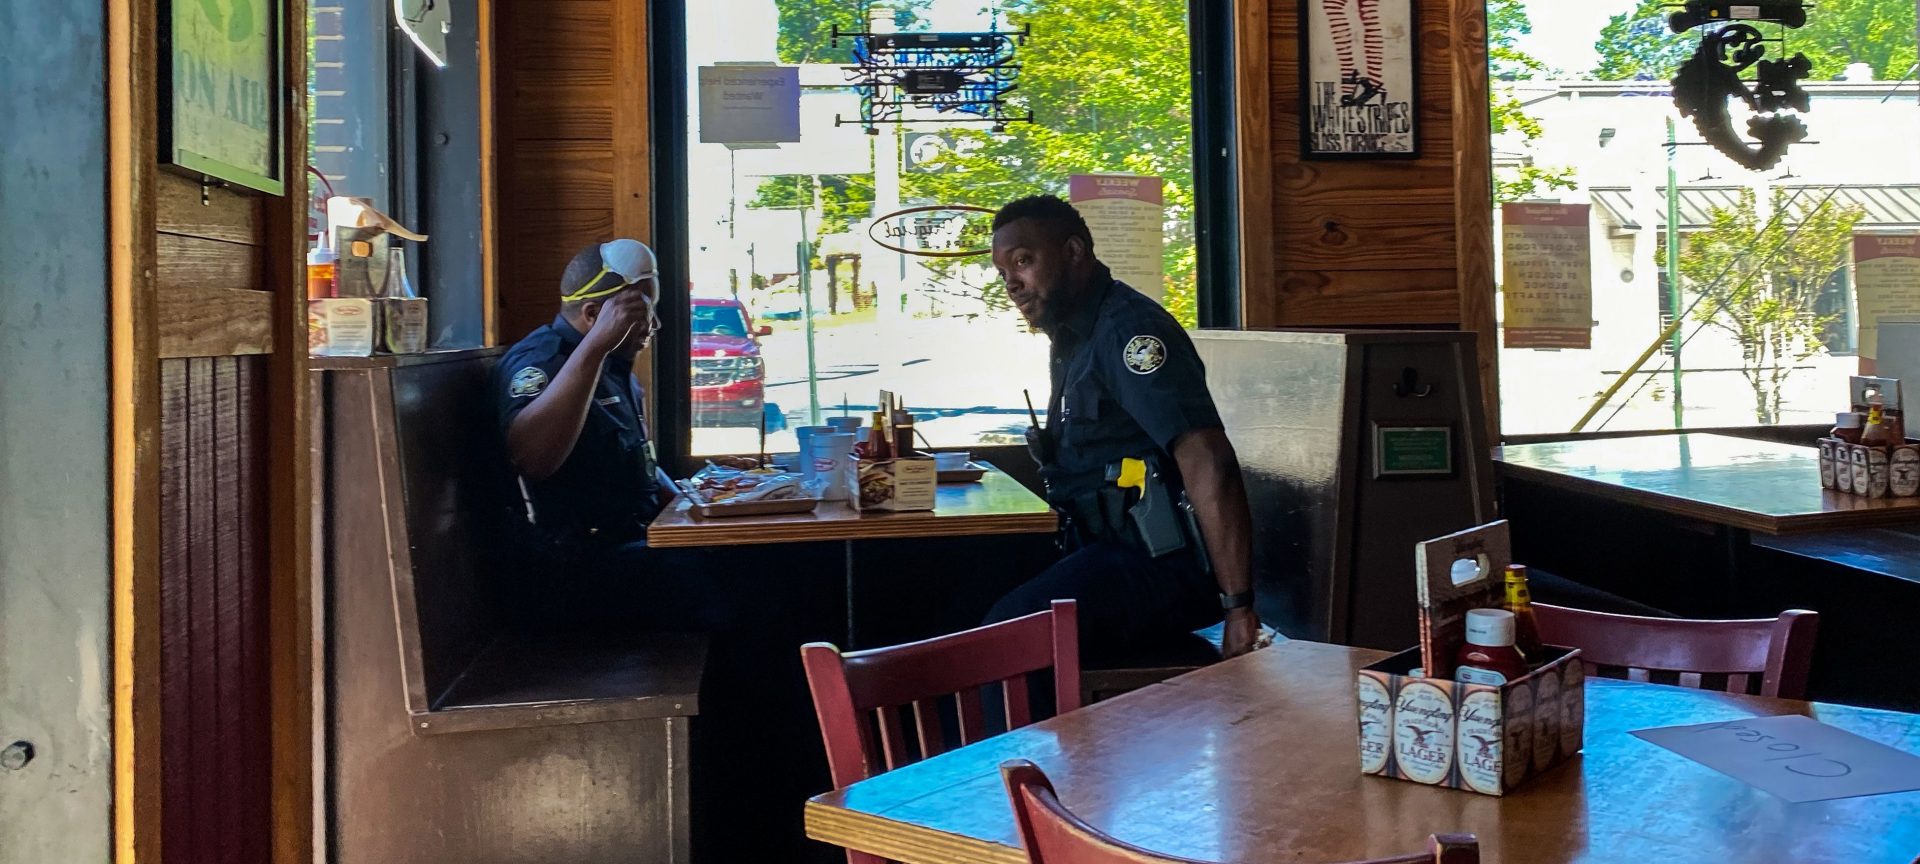 Two police officers siting at a table, eat at Moe's Original BBQ restaurant amid the coronavirus pandemic on April 27 in Atlanta, Ga. Some Georgia restaurants reopened on April 27 for limited dine-in service as the state loosened more coronavirus restrictions.